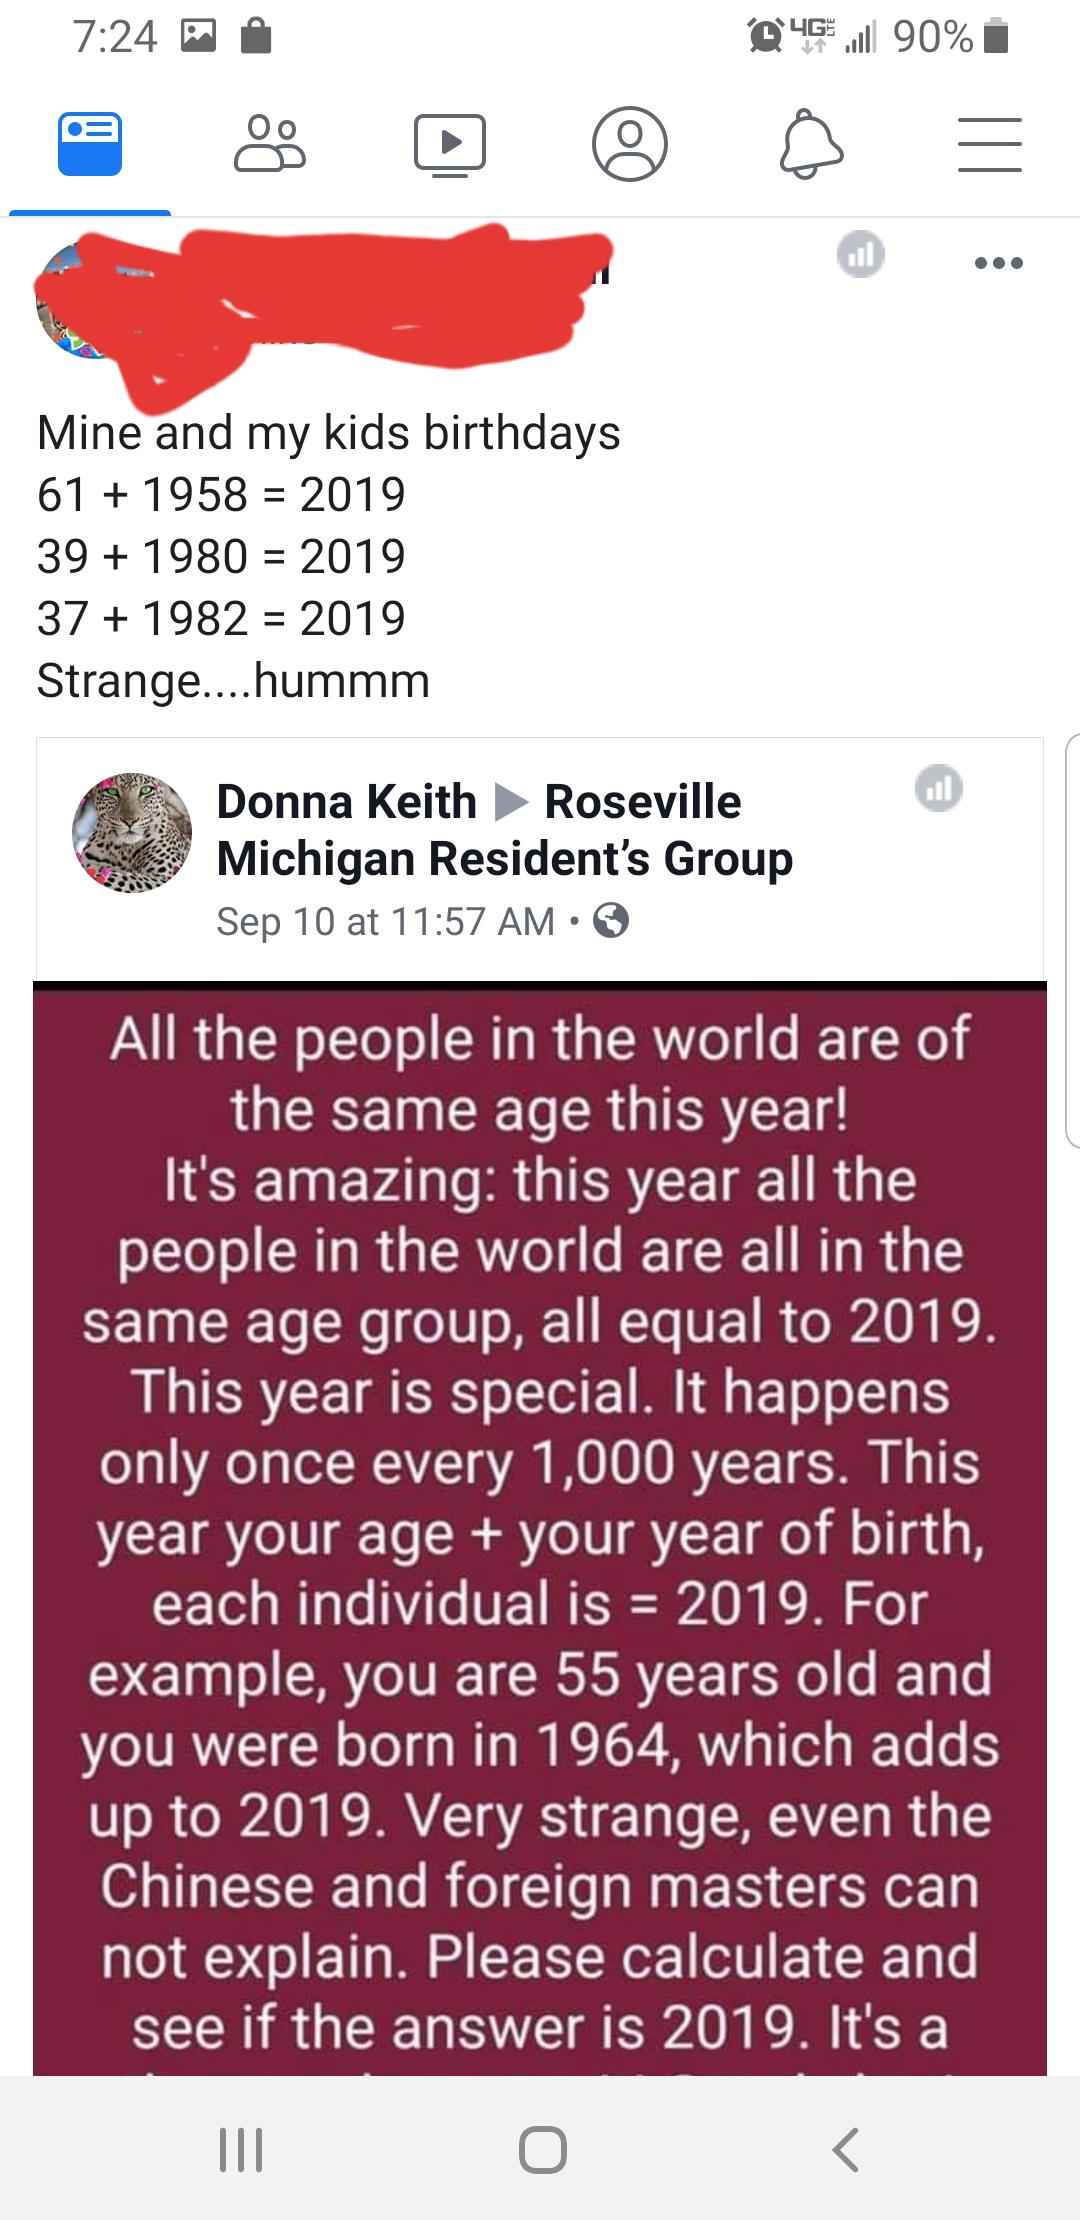 all the people in the world - @ 4G Jl 90% i Mine and my kids birthdays 61 1958 2019 39 1980 2019 37 1982 2019 Strange....hummm Donna Keith Roseville Michigan Resident's Group Sep 10 at All the people in the world are of the same age this year! It's amazin